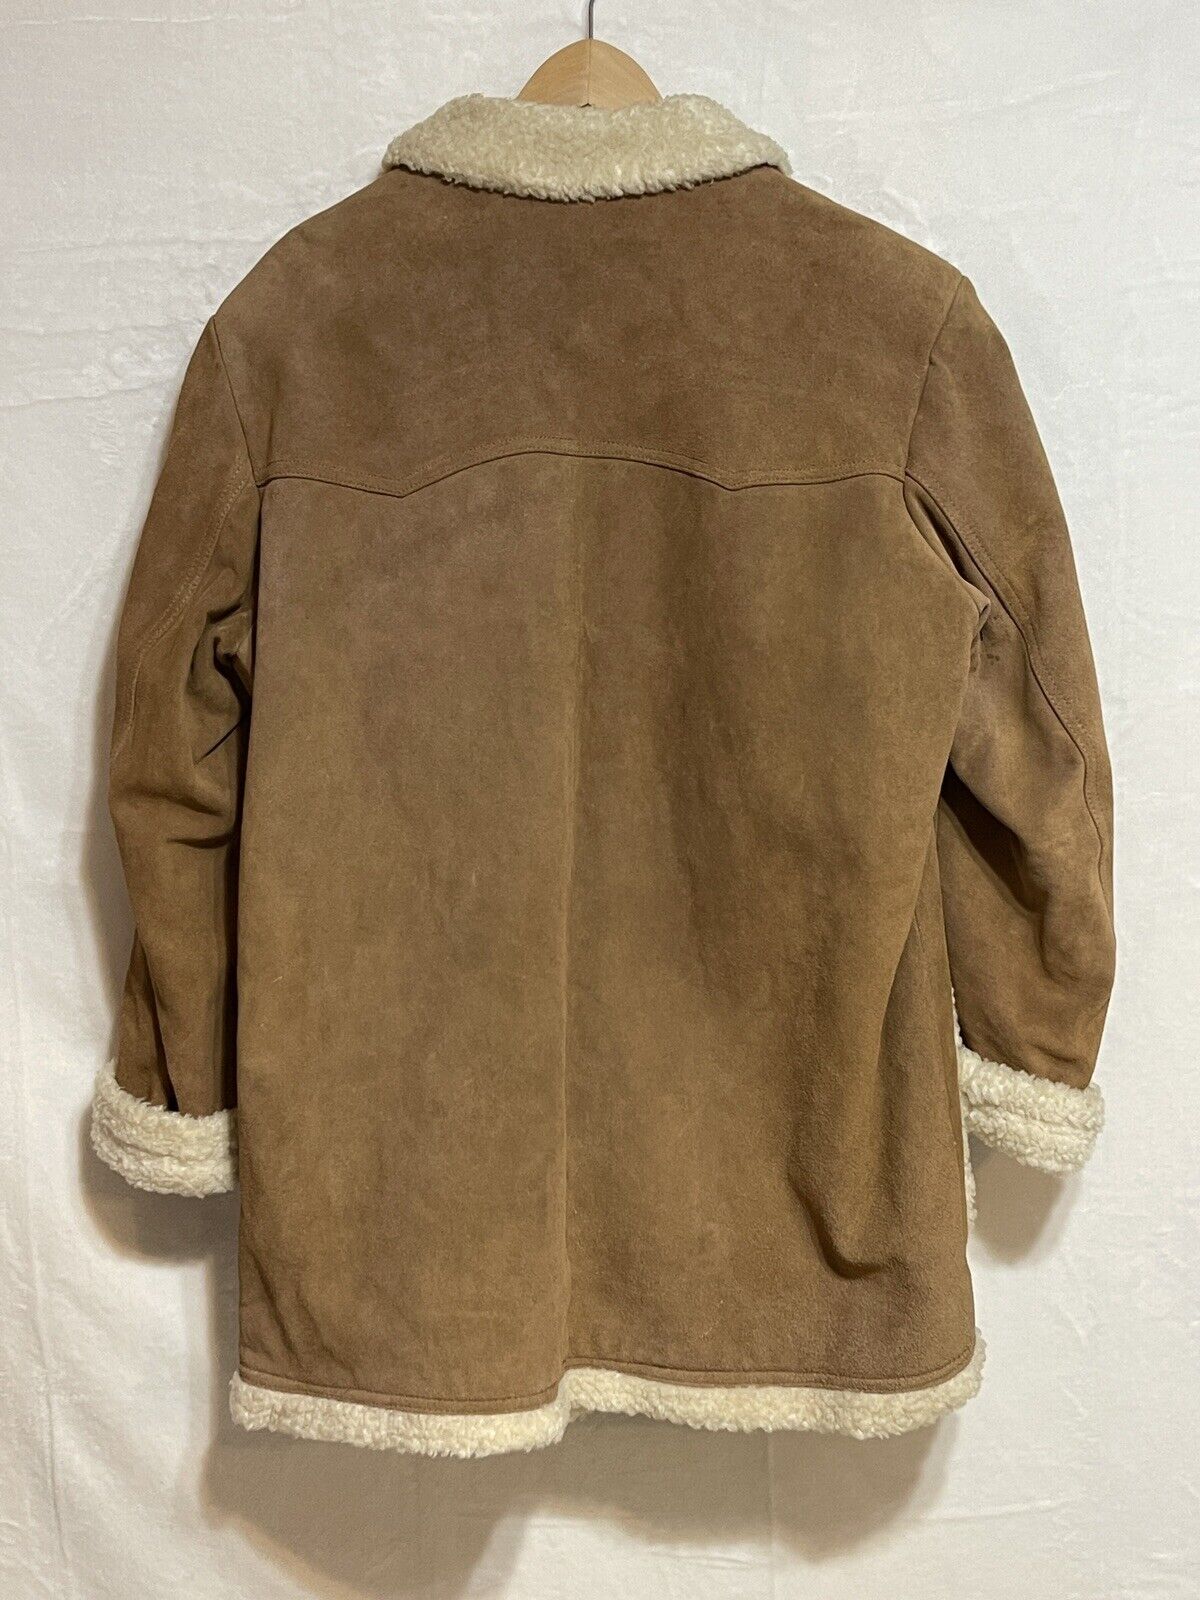 Vintage Rancher Jacket Mens 44 Suede Sherpa Lined Western Farm Coat Yellowstone